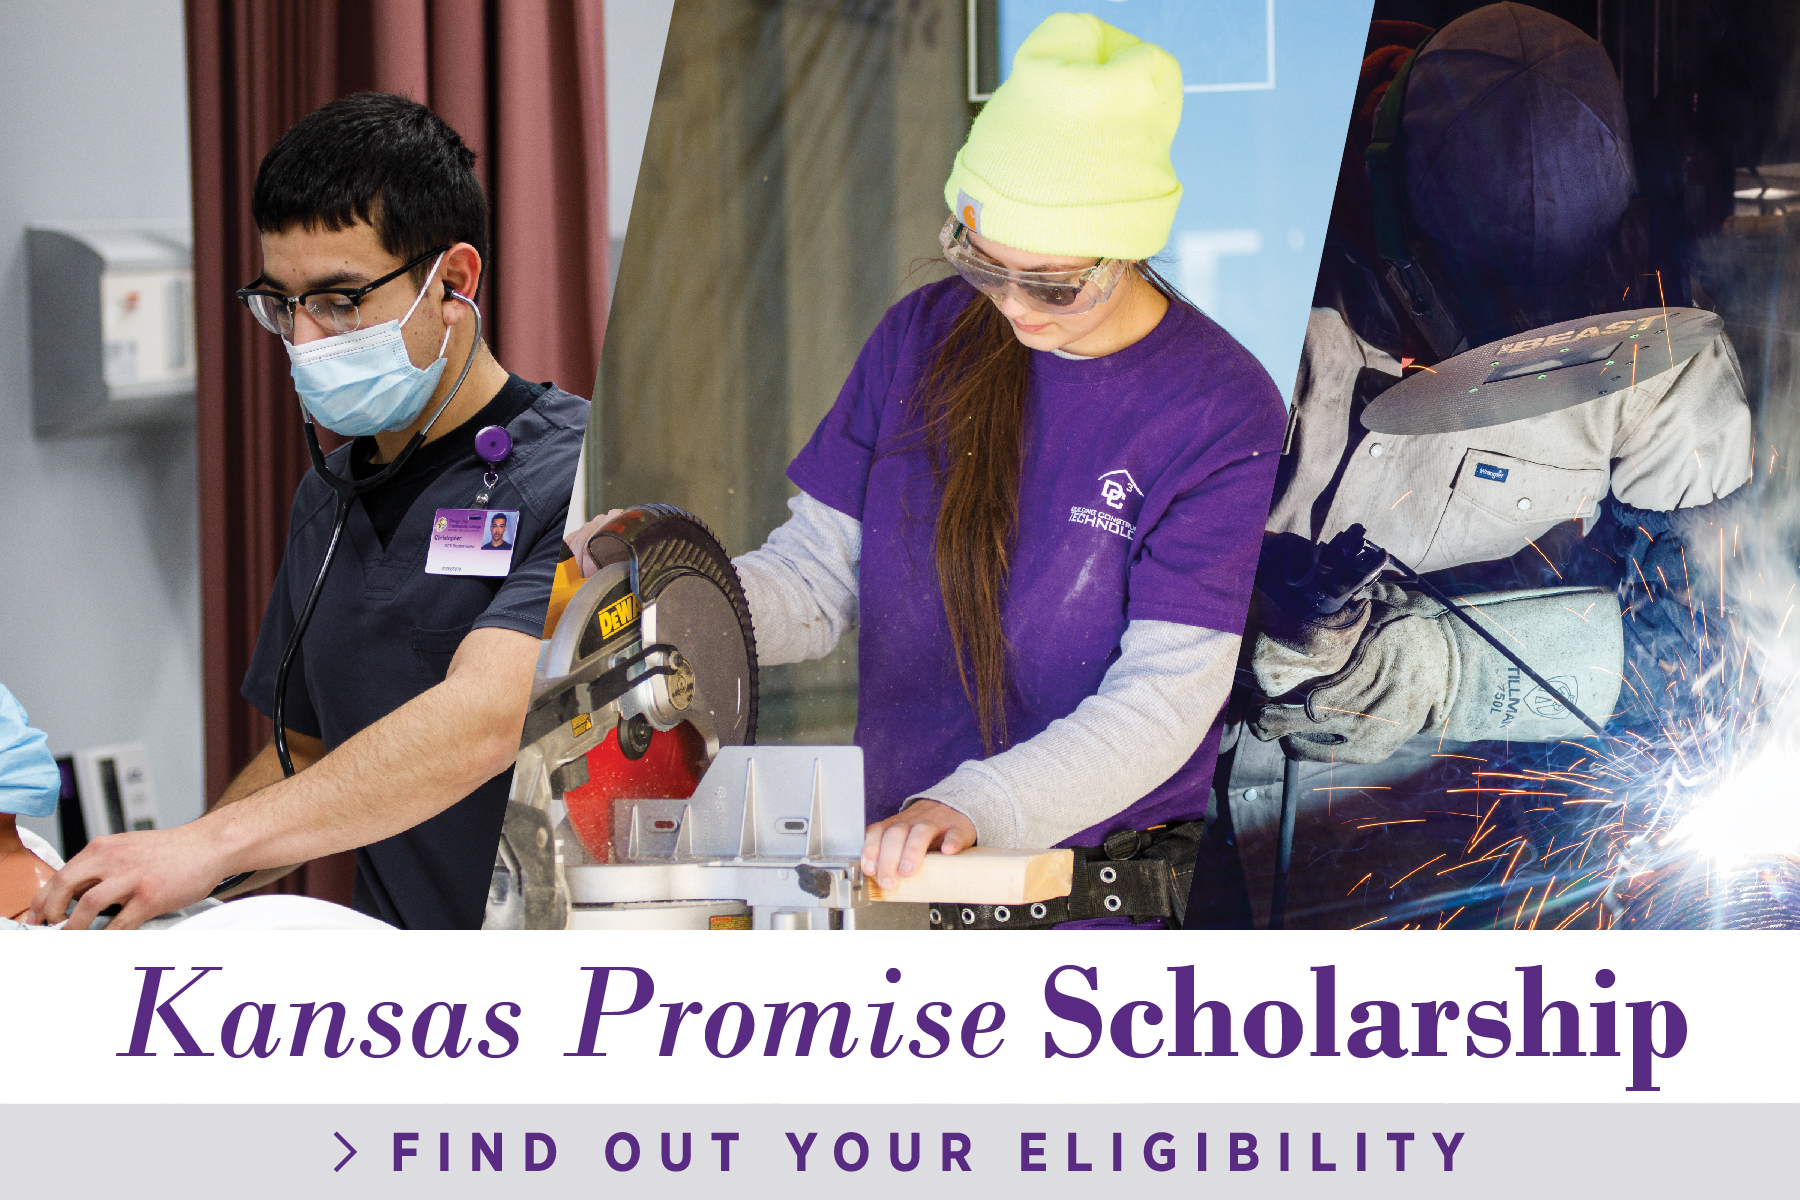 Kansas Promise Scholarships, Find out your eligibility